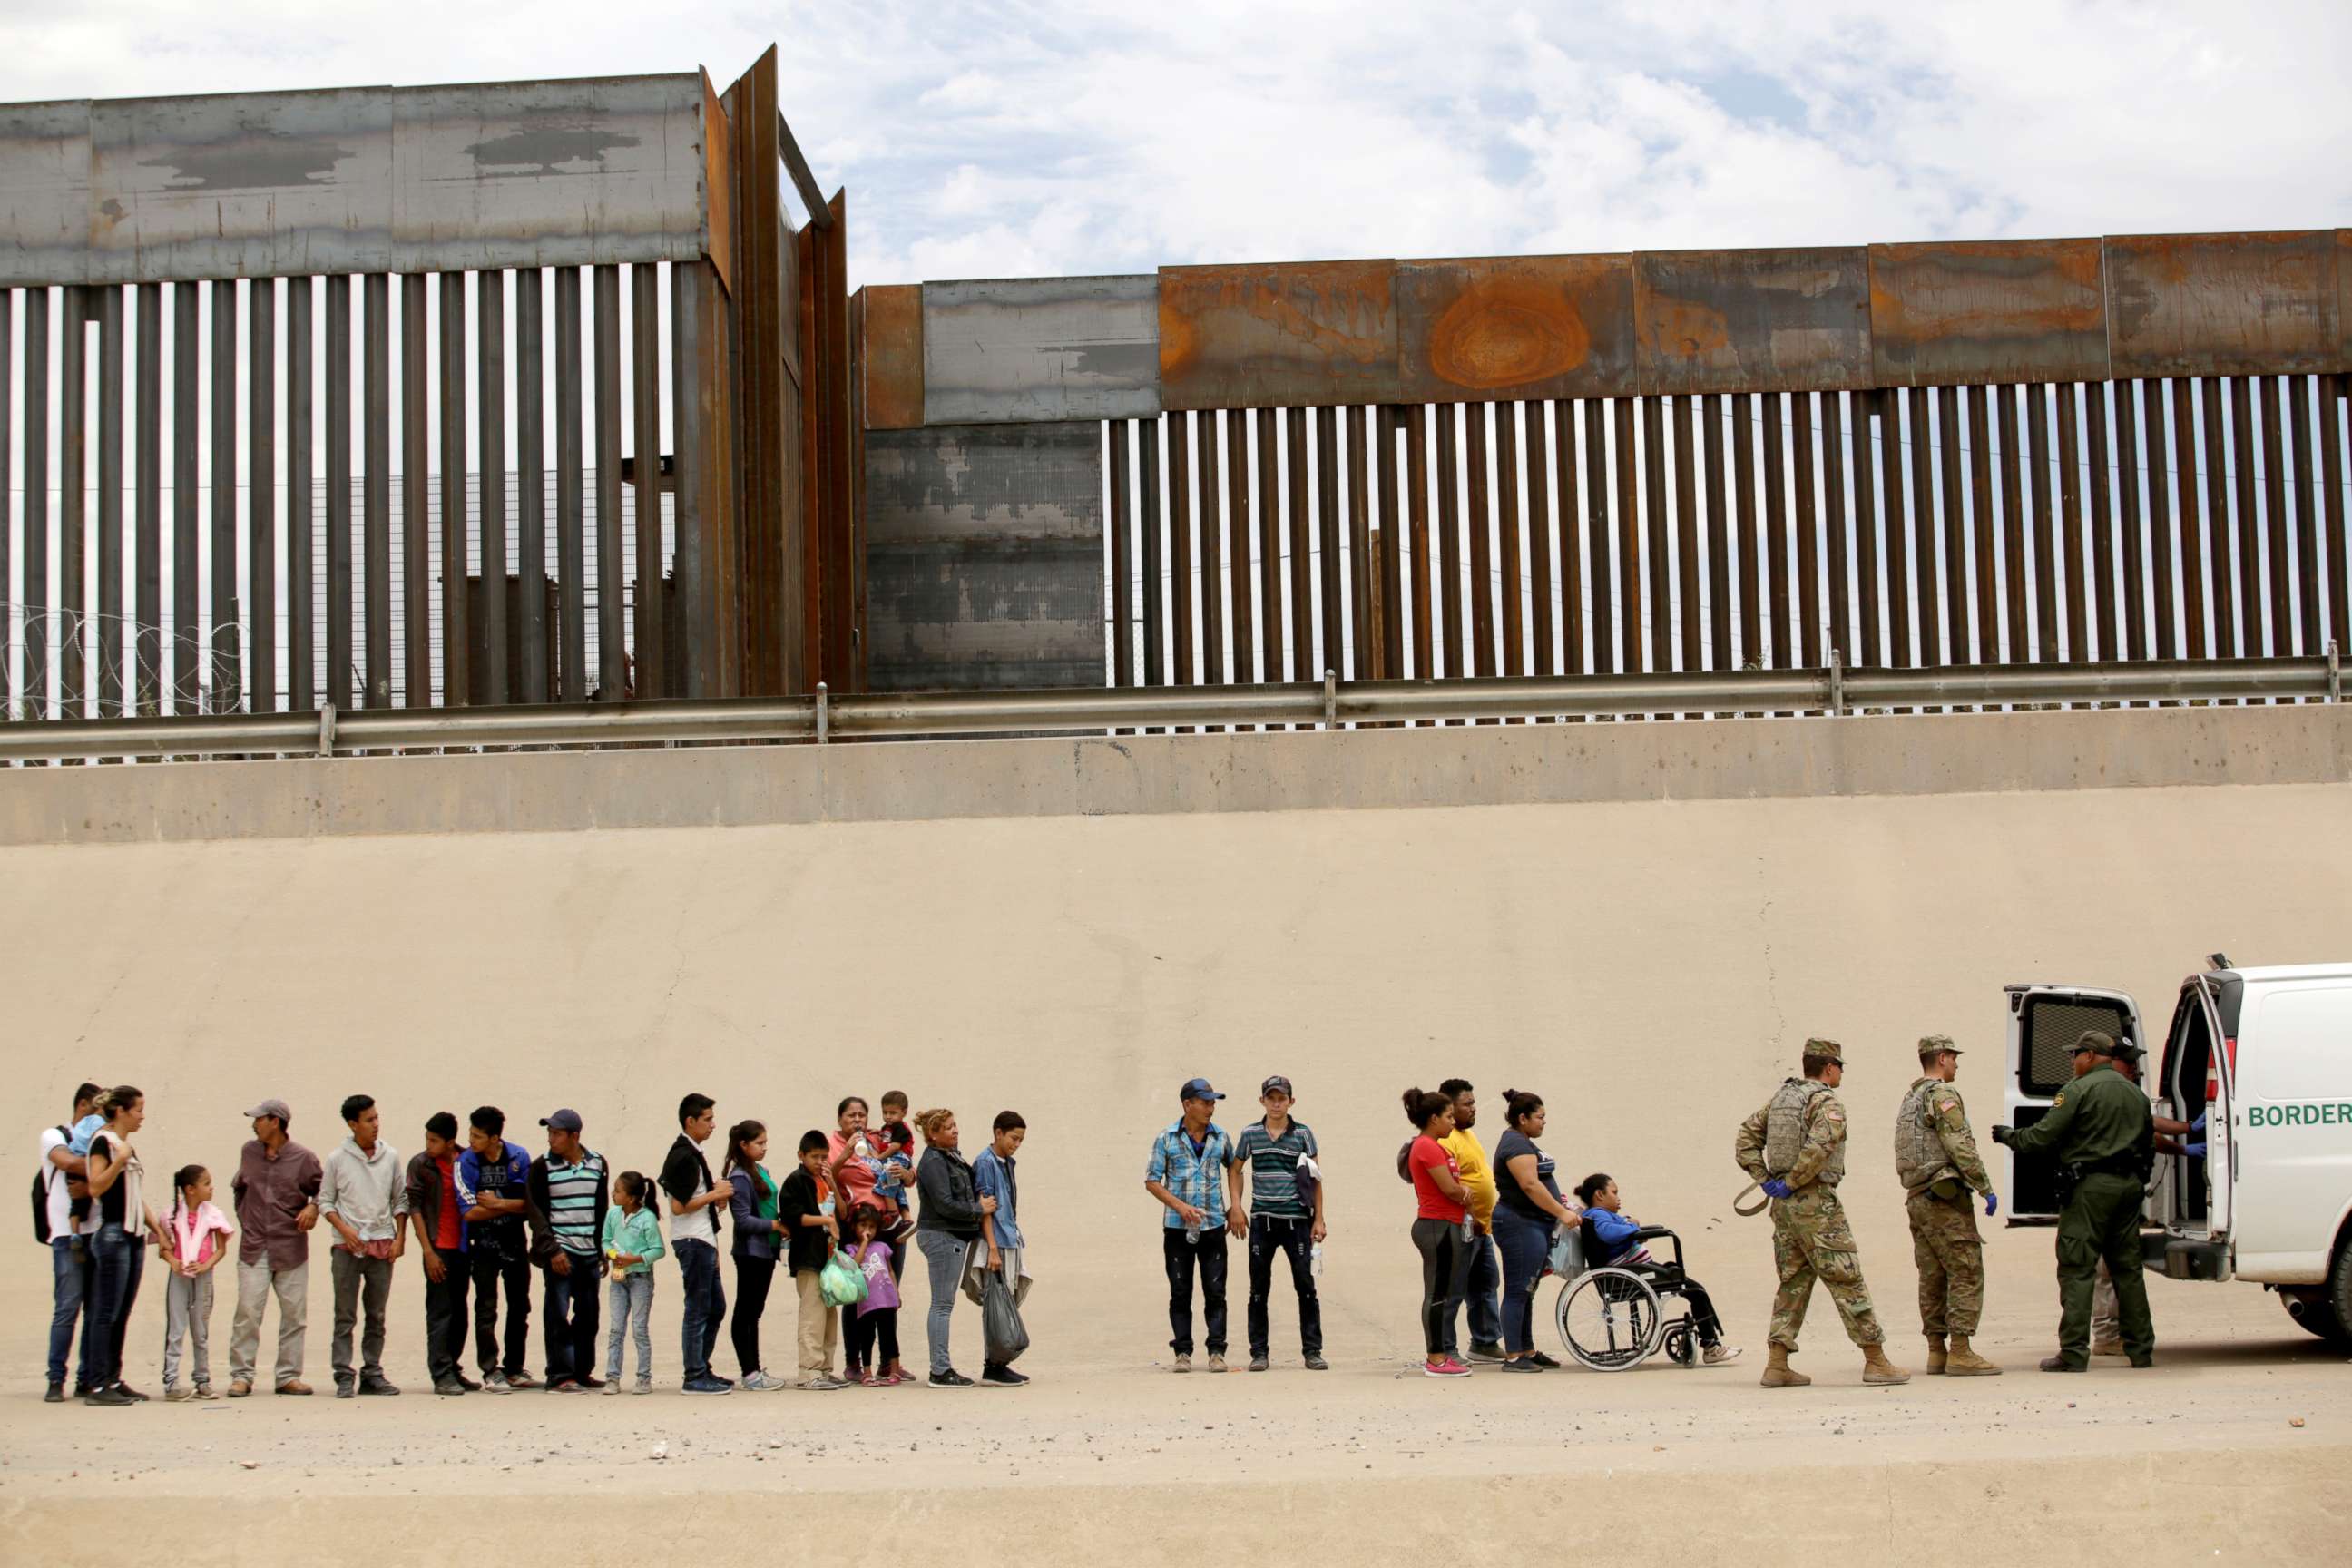 PHOTO: Members of the Border Patrol and U.S. Military help a migrant woman in a wheelchair as she and others migrants illegally crossed the border between Mexico and the U.S. to request political asylum, as seen from Ciudad Juarez, Mexico, July 6, 2019.